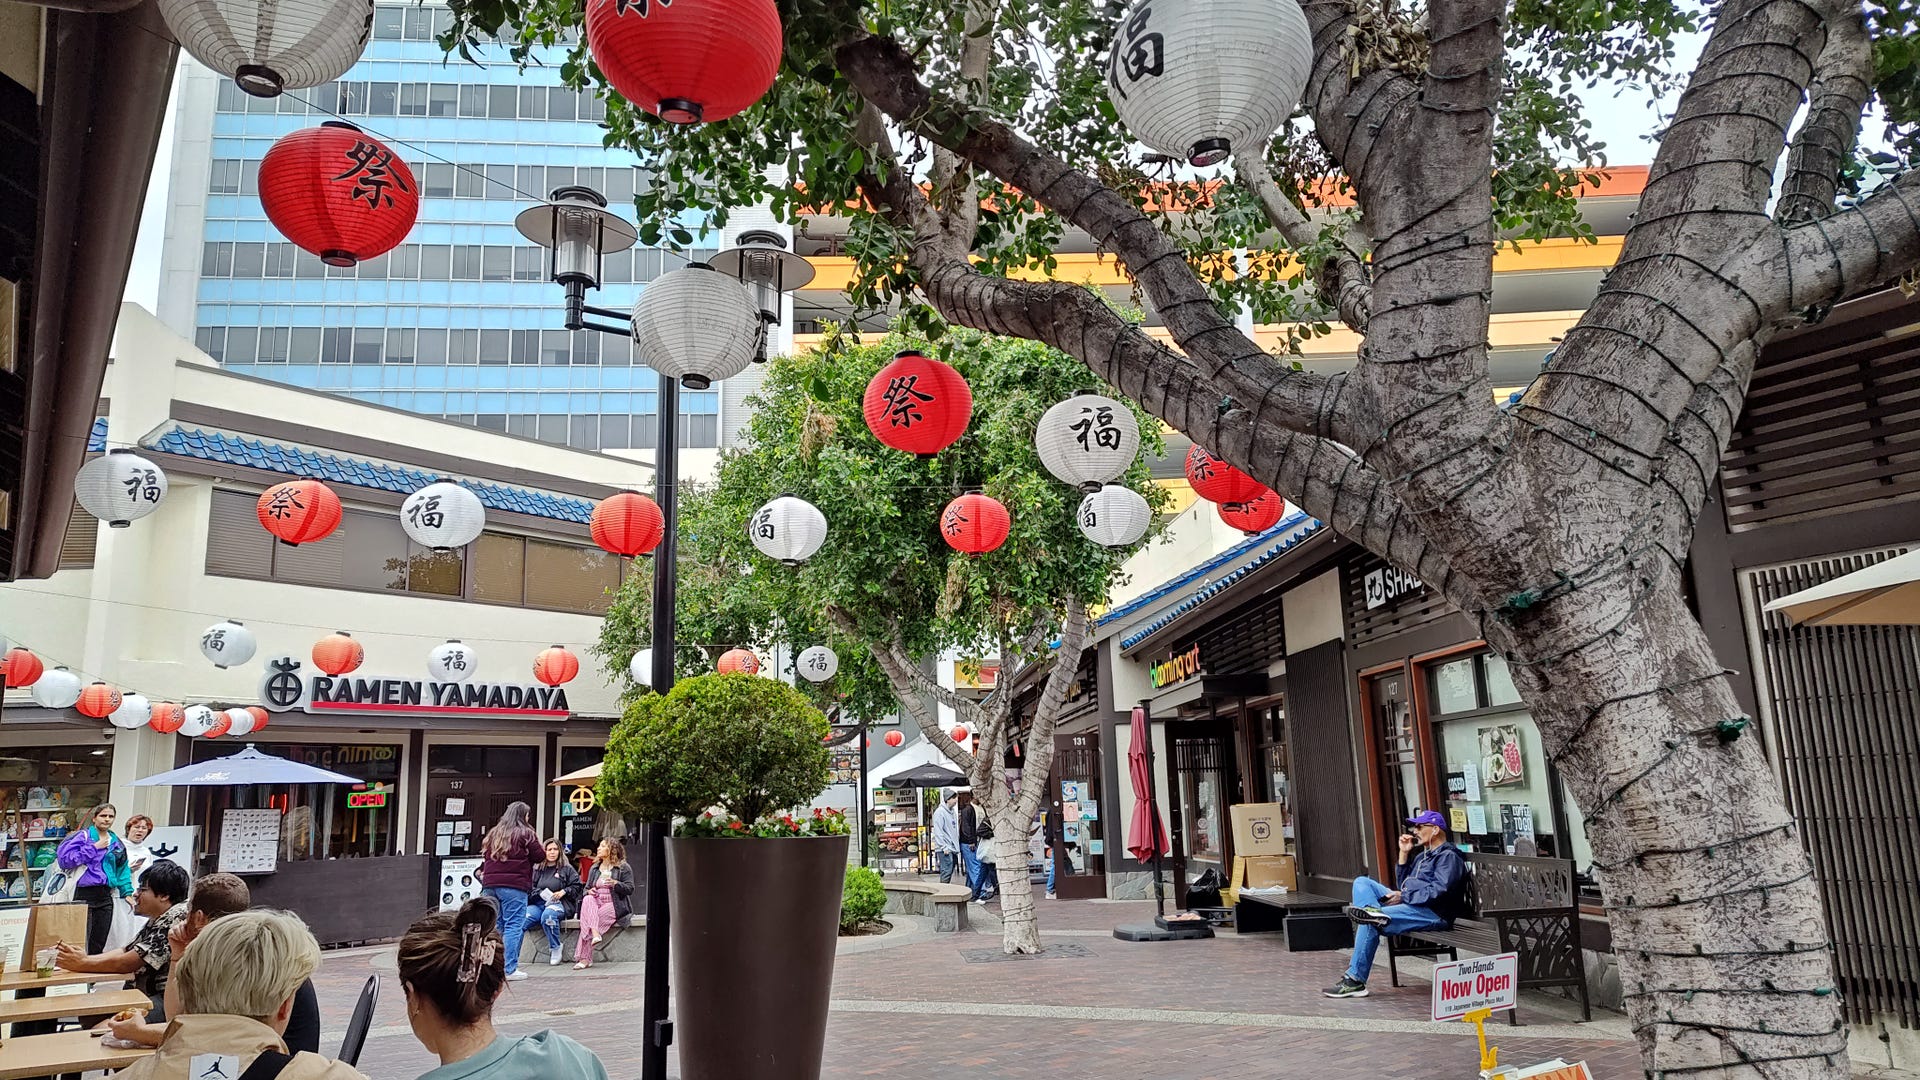 A scene in the Little Tokyo neighborhood of Los Angeles, where red and white lanterns strung between trees and shops hang over passersby.